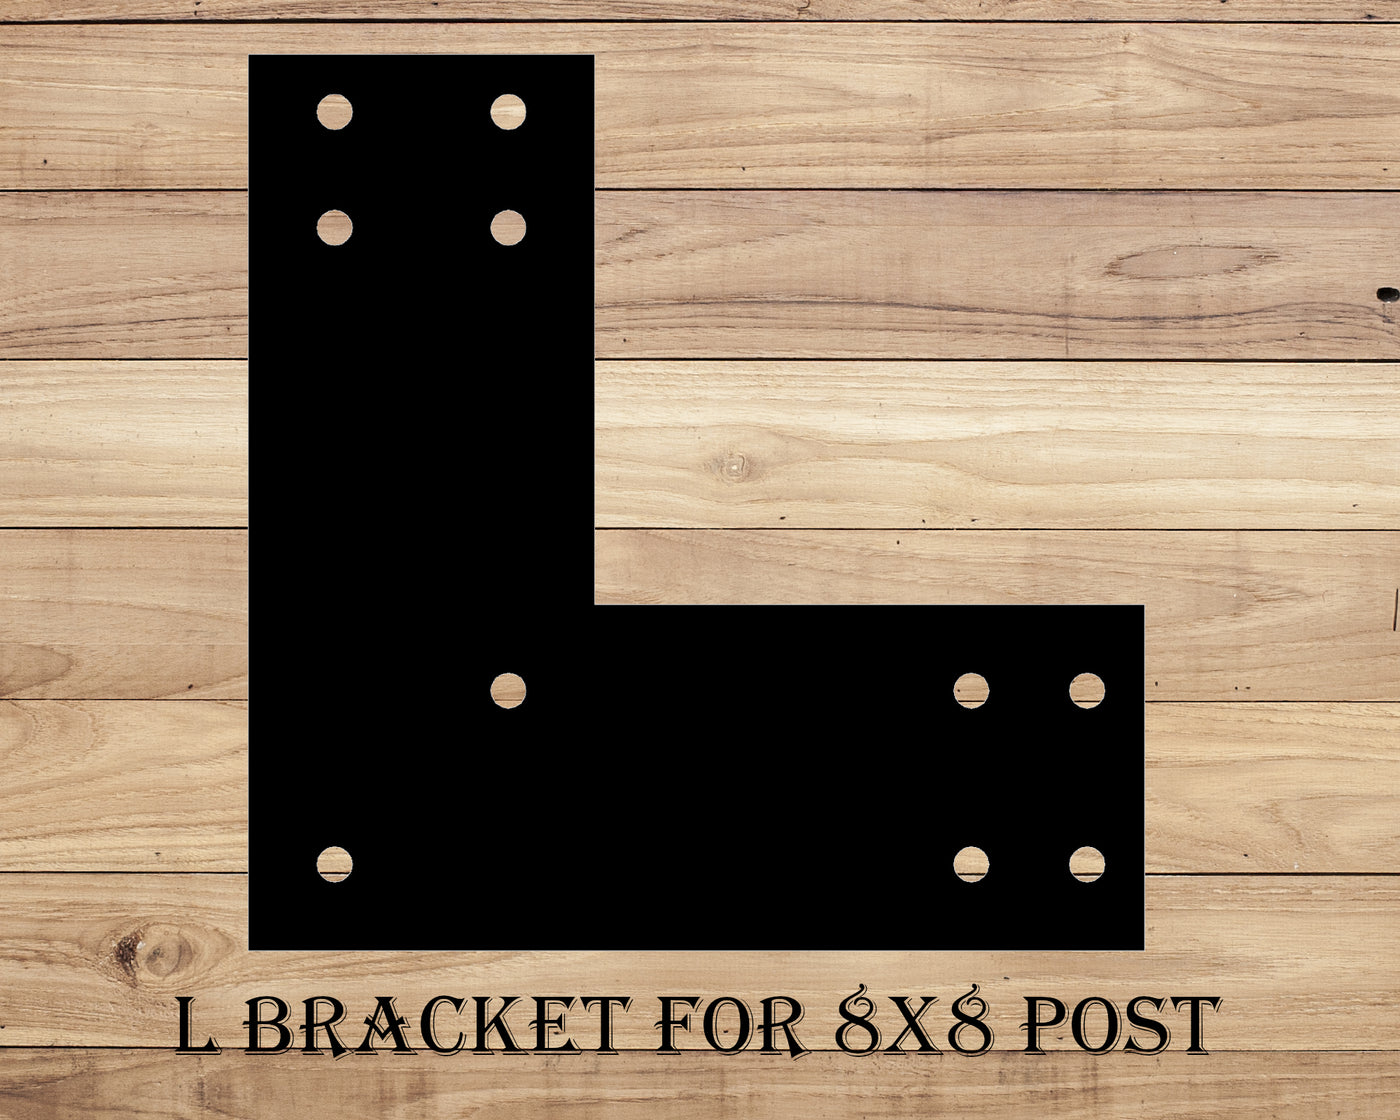 Brackets for 8x8 Dimensional Lumber - Madison Iron and Wood - Brackets - metal outdoor decor - Steel deocrations - american made products - veteran owned business products - fencing decorations - fencing supplies - custom wall decorations - personalized wall signs - steel - decorative post caps - steel post caps - metal post caps - brackets - structural brackets - home improvement - easter - easter decorations - easter gift - easter yard decor